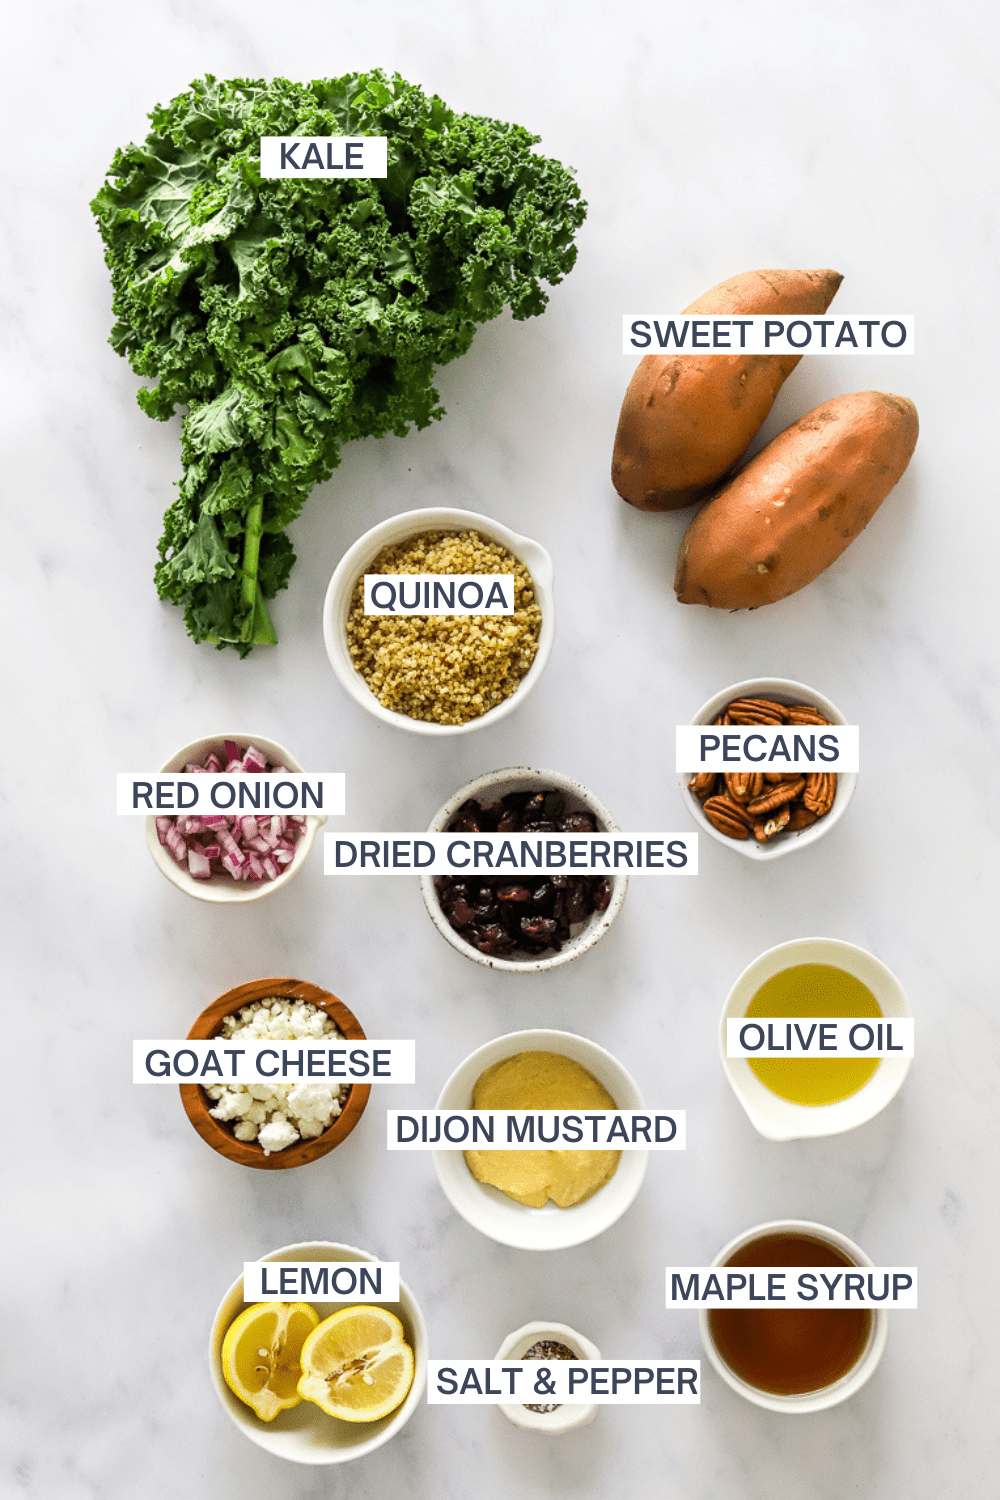 Kale and sweet potato salad ingredients in bowls with labels over each ingredient.